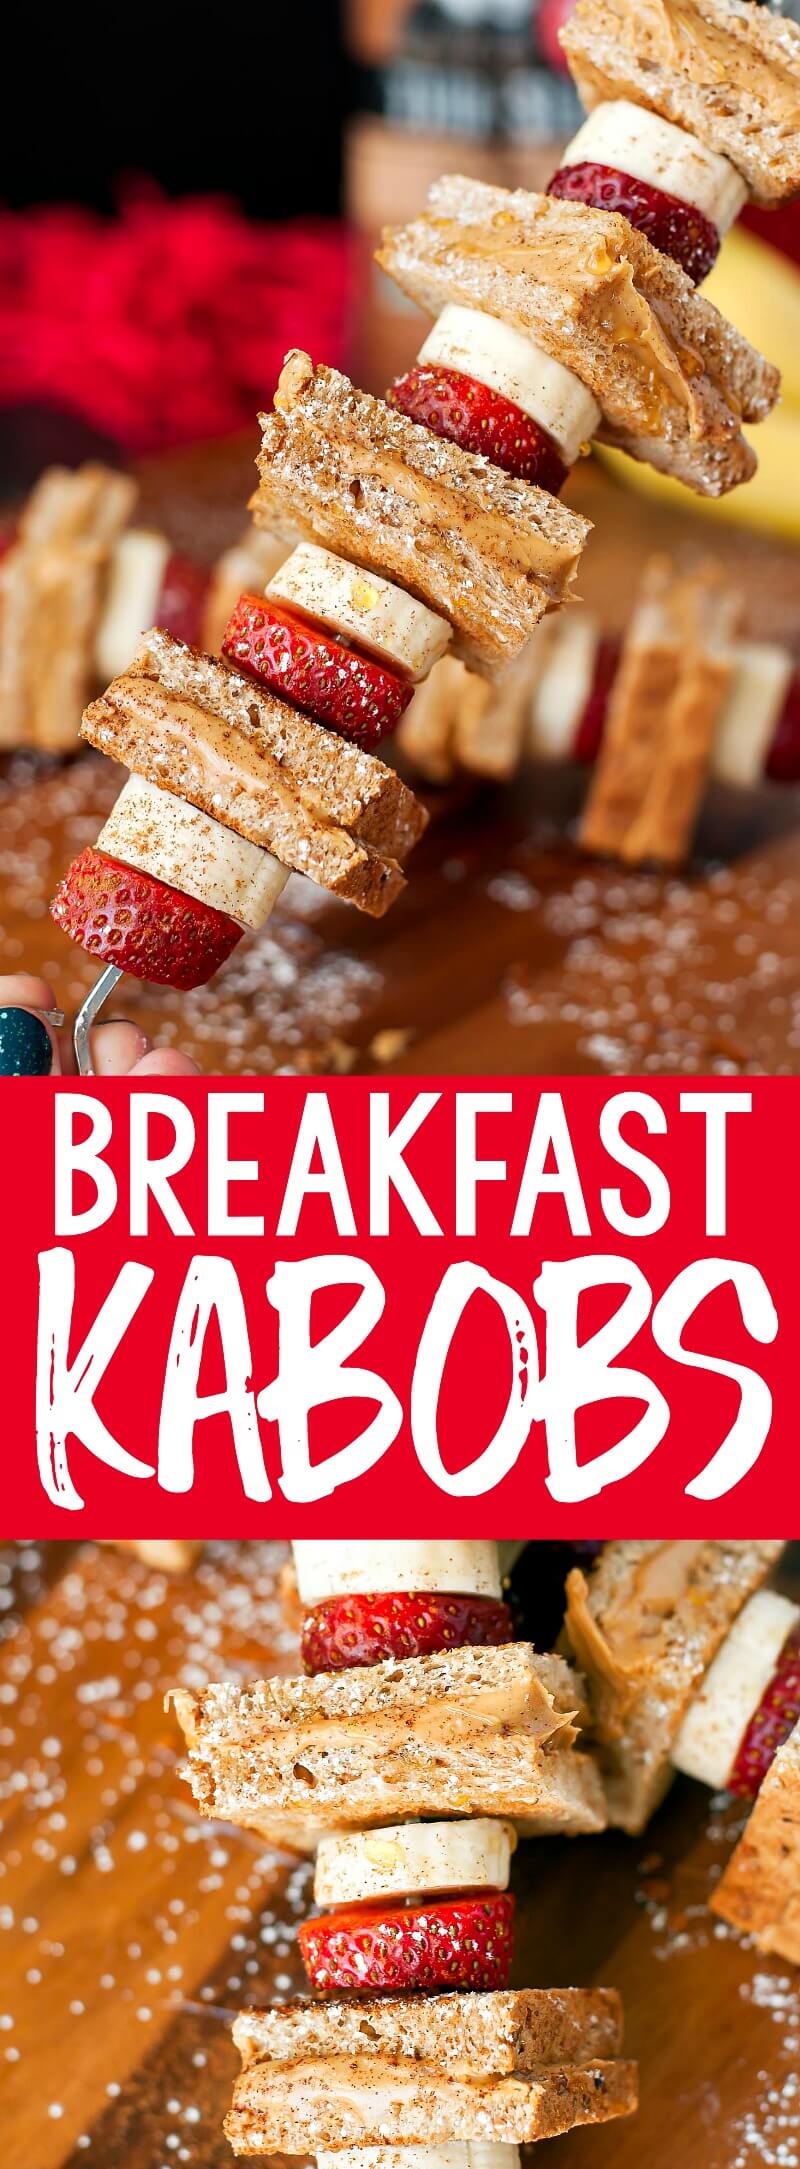 Whip up these Strawberry Banana Peanut Butter Toast on a Stick for a fun back to school breakfast! These sweet and savory breakfast kabobs are sure to be a hit! #kabobs #toast #breakfast #peanutbutter #banana #strawberry #kidfriendly #breakfast #snack